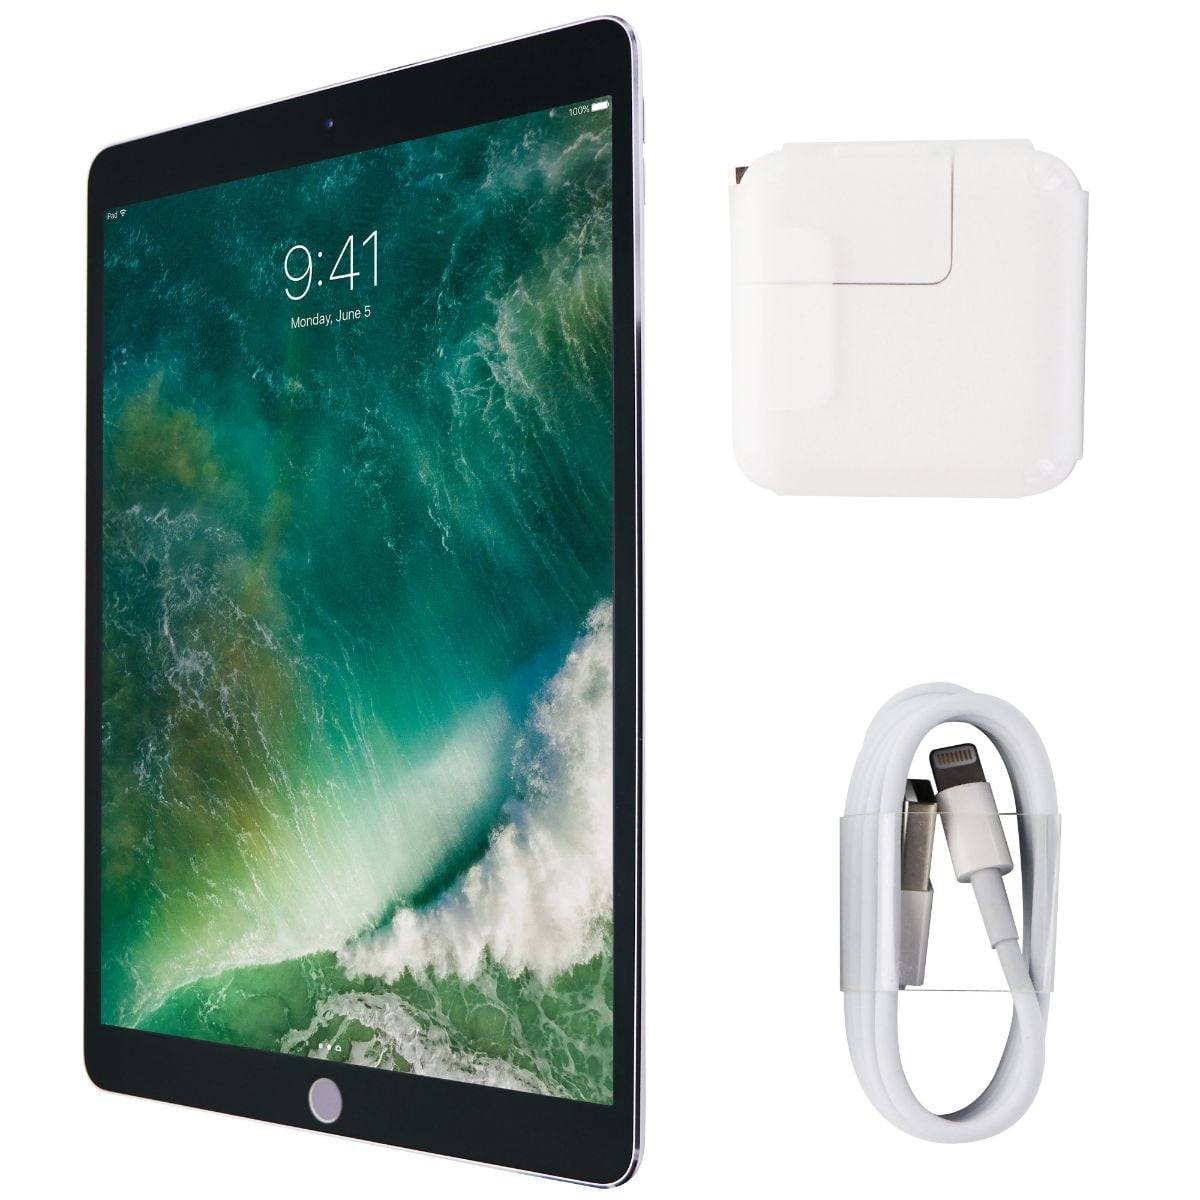 team Onhandig kroon Apple iPad Pro MPDY2LL/A 10.5 inch (WiFi Only) Tablet - 256GB - Space Gray  A1701 (Refurbished) - Walmart.com